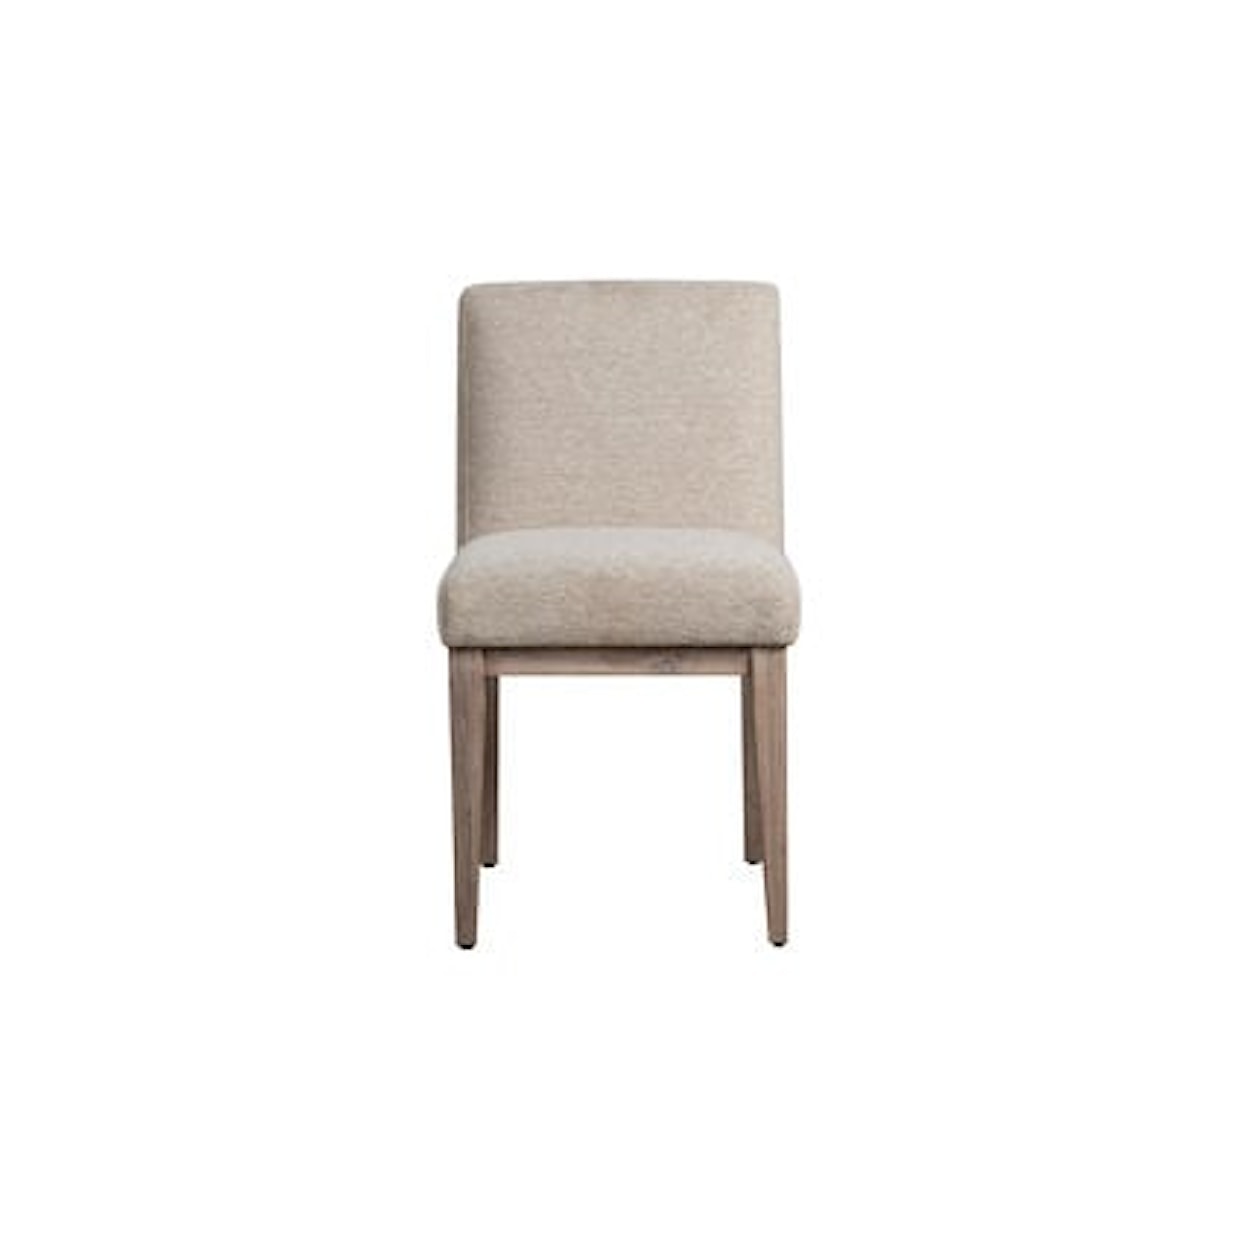 Dovetail Furniture Daisy Daisy Dining Chair